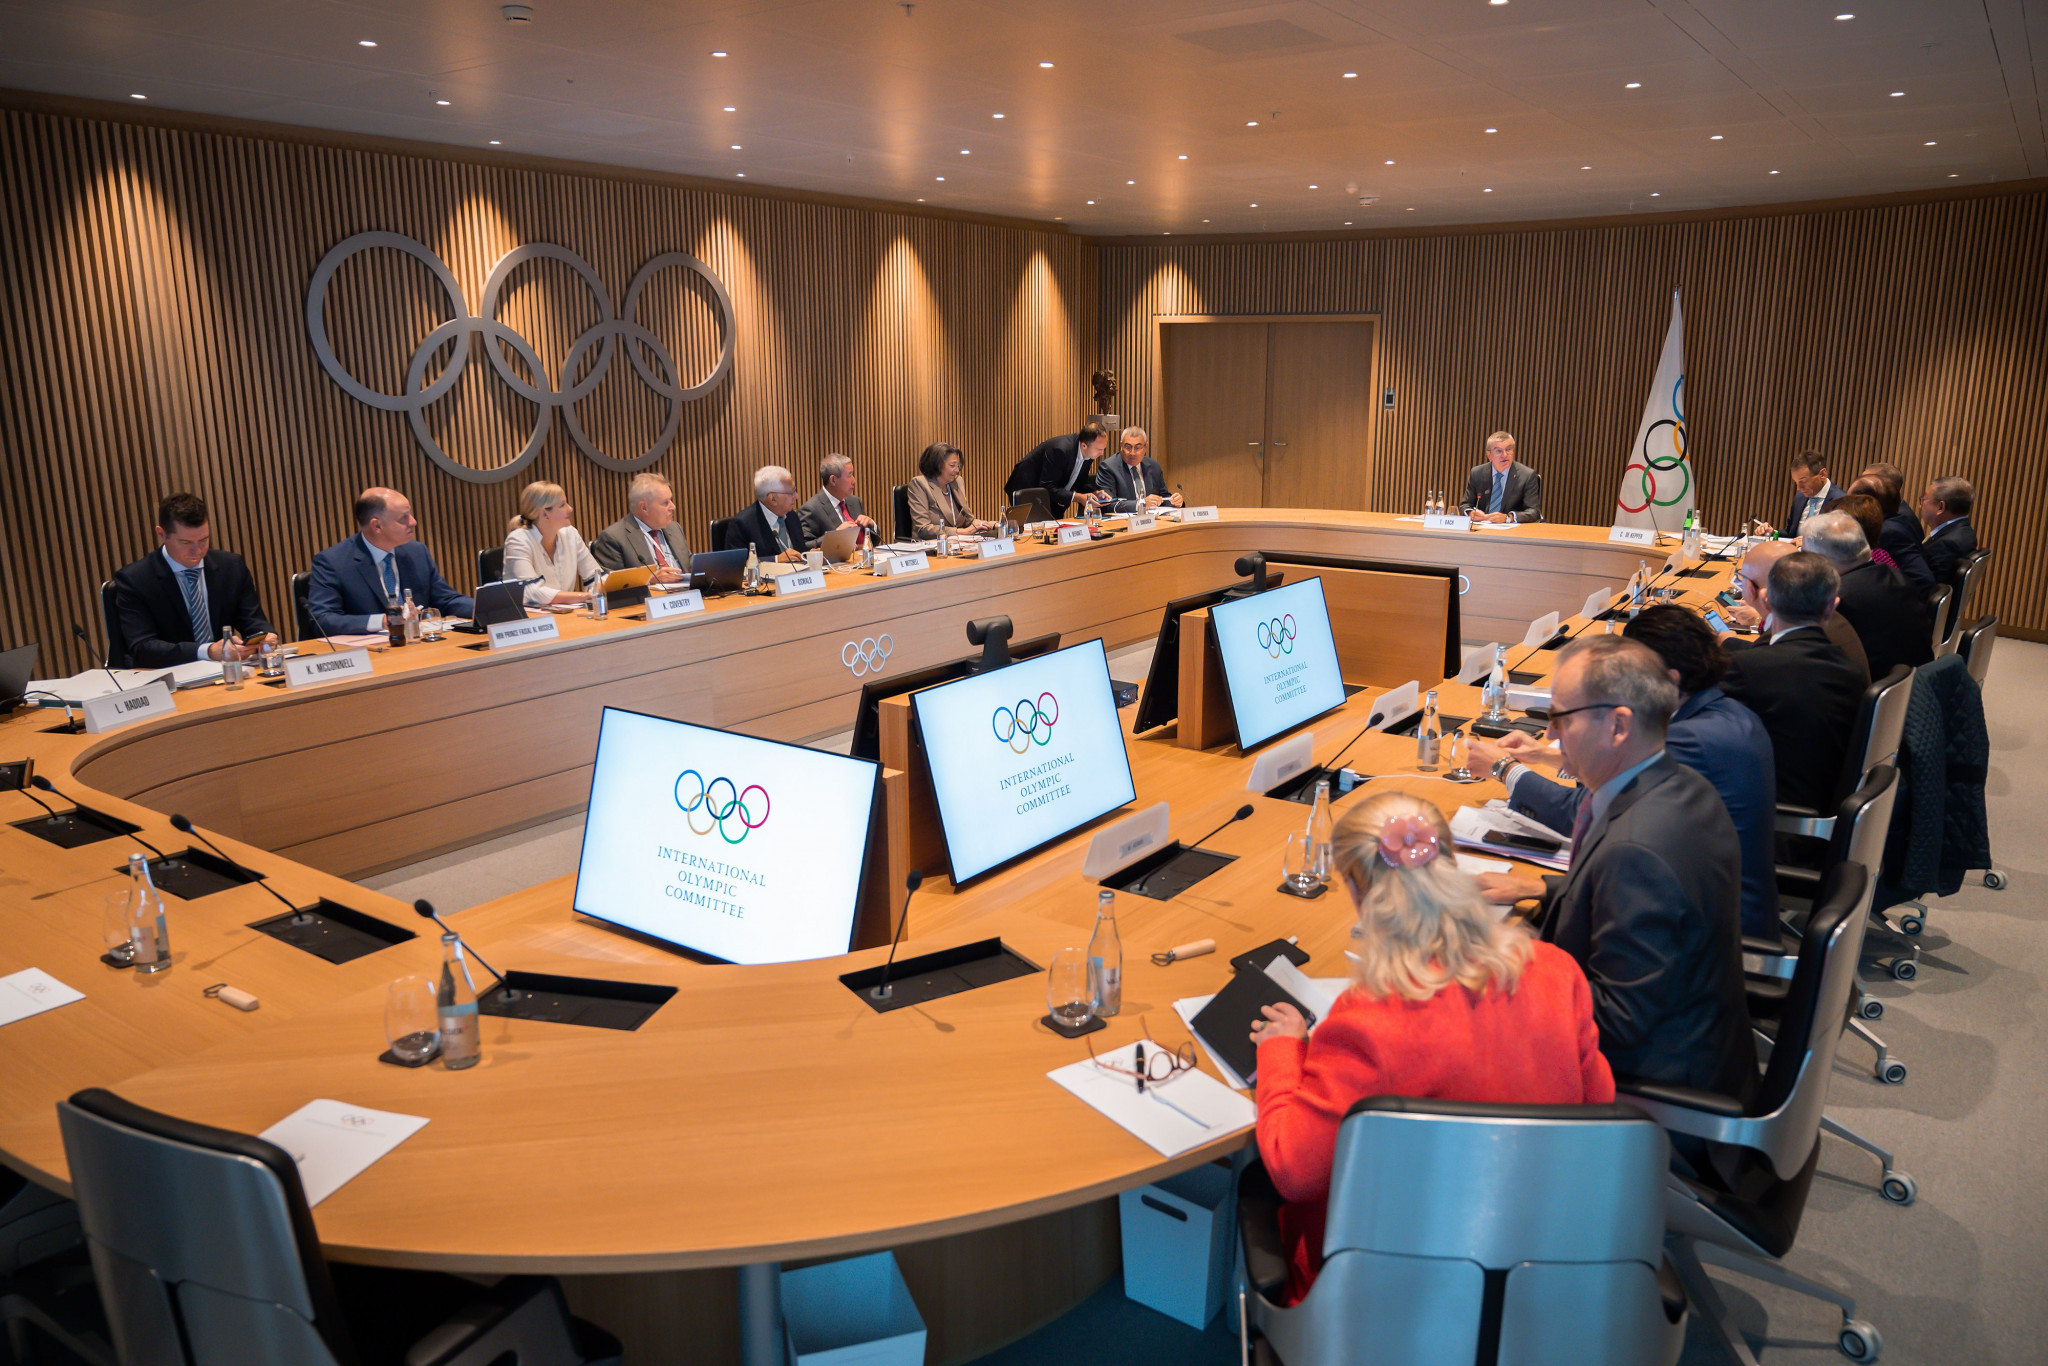 Funding for thelong-term storage of drugs samples was approved by the IOC at its Executive Board meeting in Lausanne today ©Getty Images